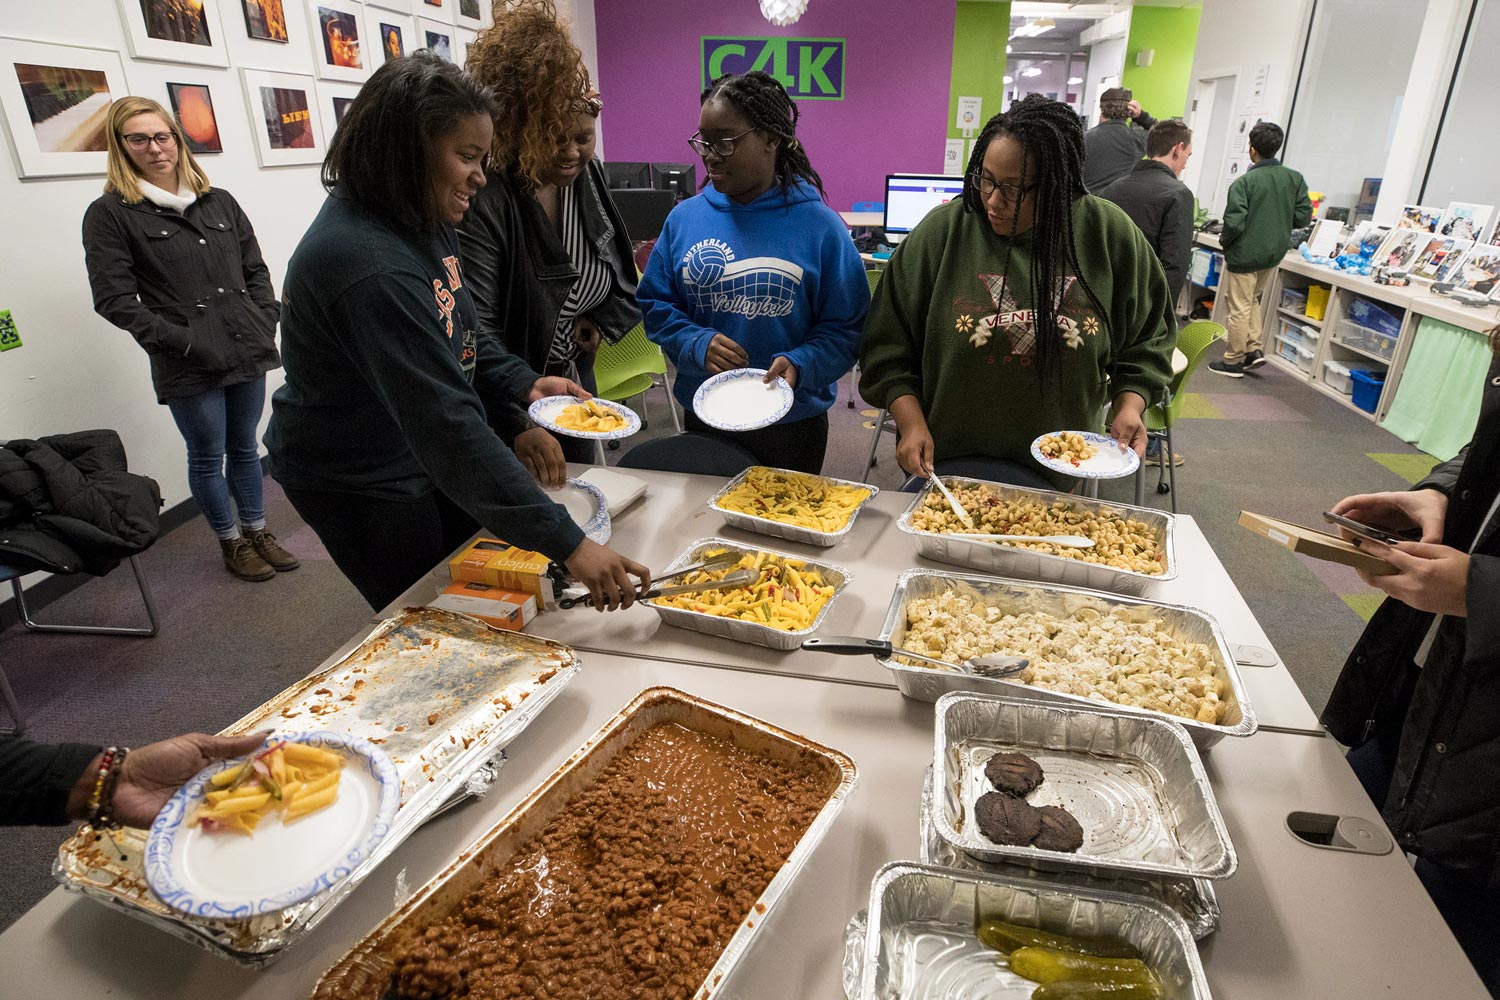 Niedia Washington, second from the left, getting food with her friends at a potluck